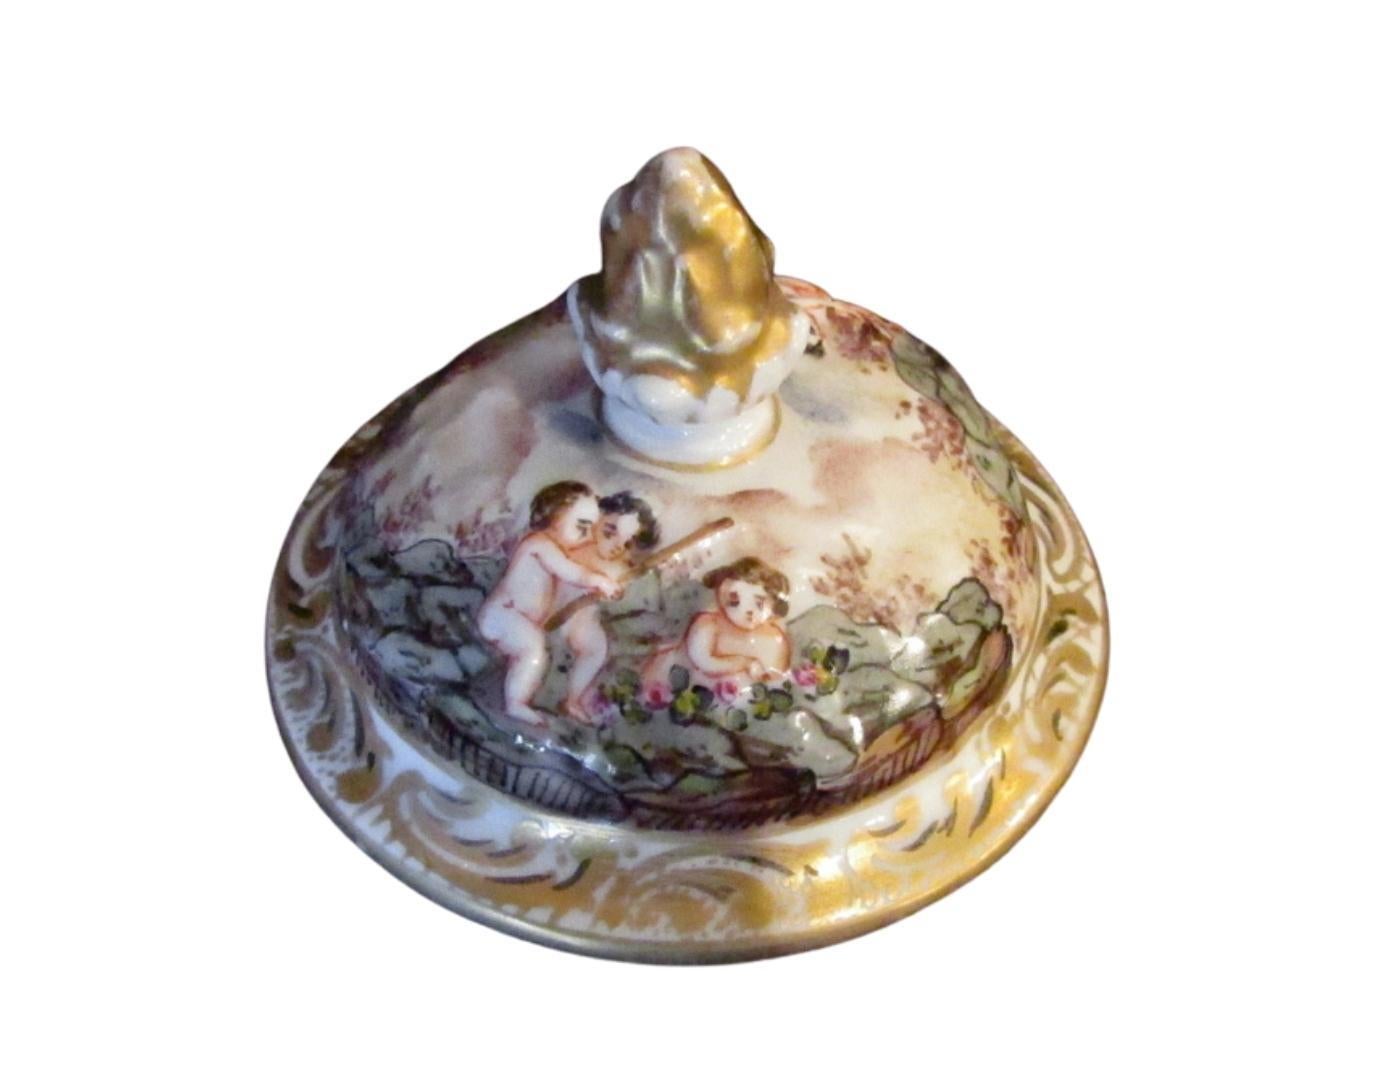 Late 19th Century, Pair of Porcelain Capodimonte Urns with Covers For Sale 1